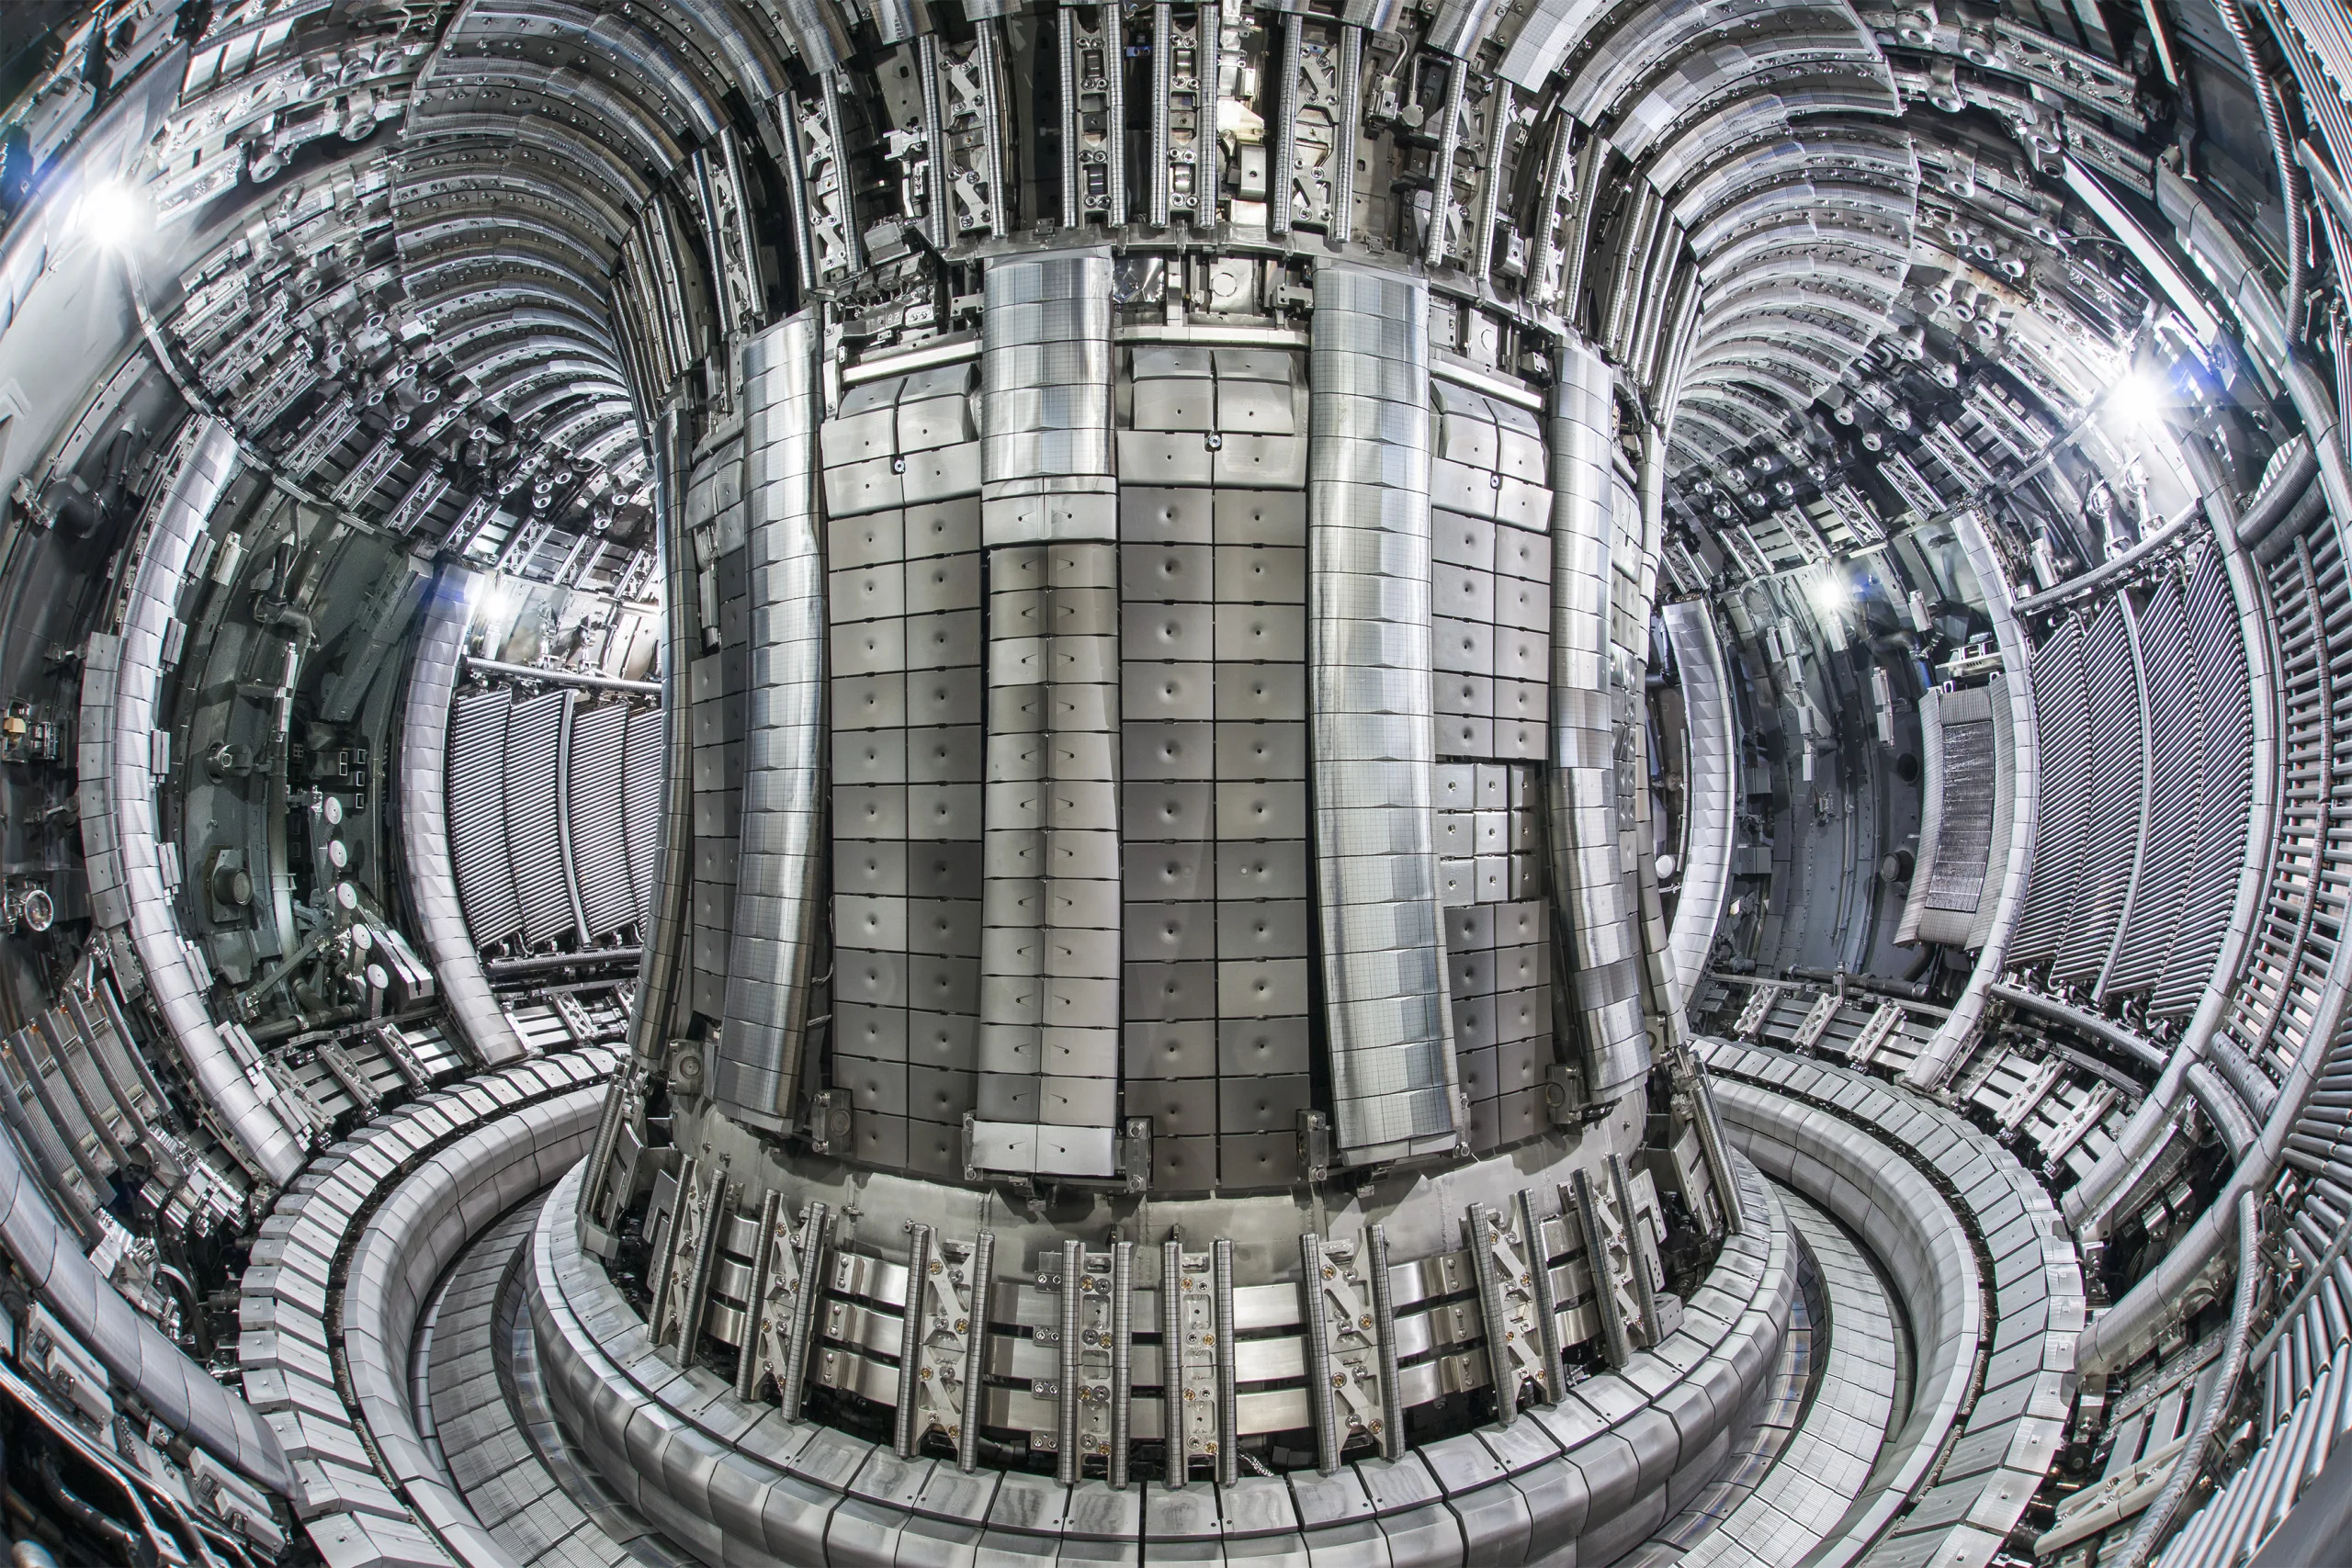 Jet Fusion Facility Sets New Energy Record, Paving Way For Future Powerplants